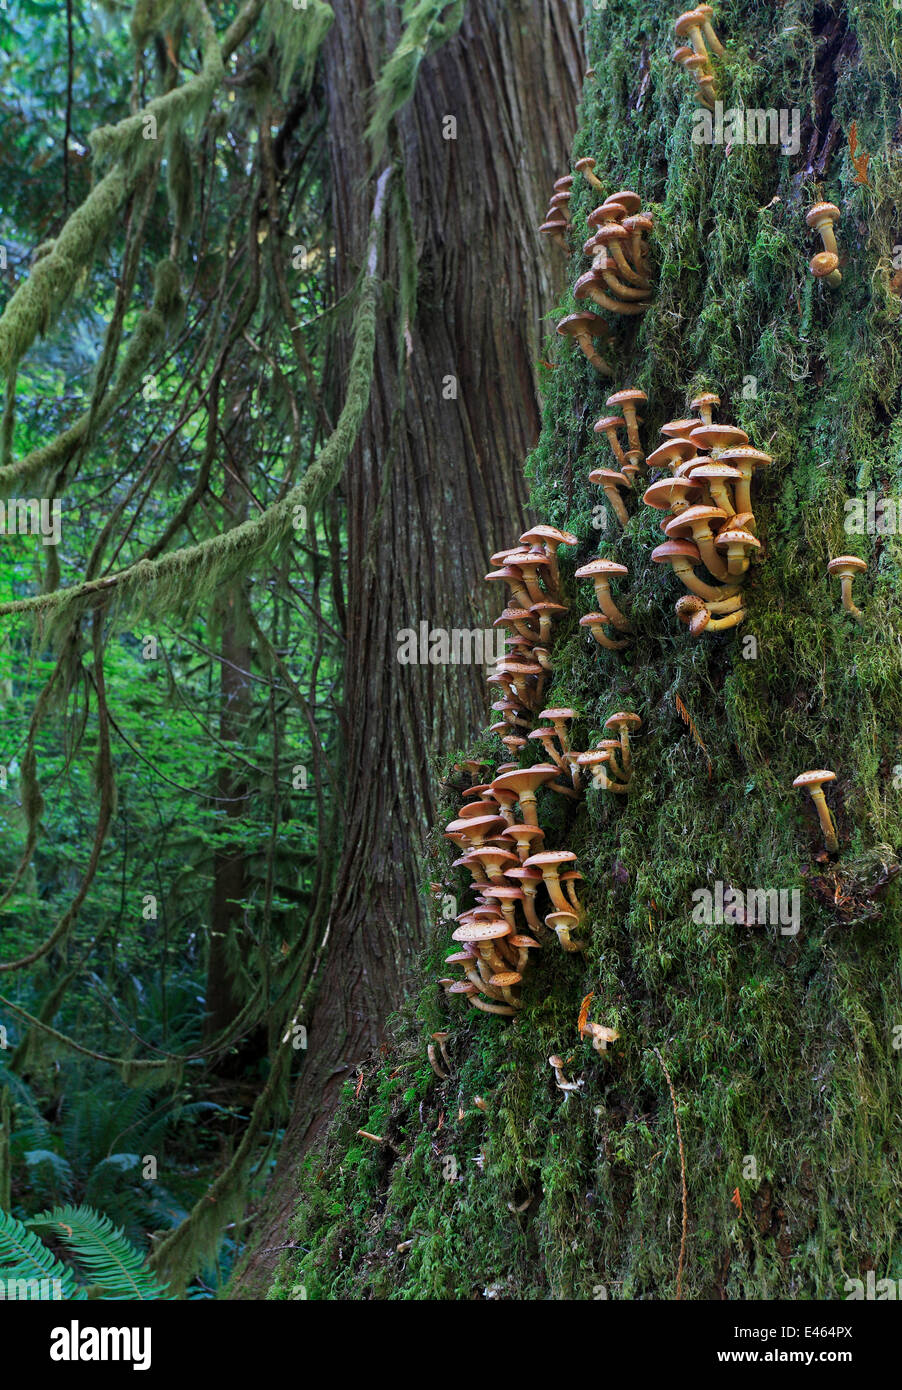 Western red cedar tree (Thuja plicata) trunks with moss and fungi, inland temperate rainforest of Olympic National Park, Washington, USA, Western North America, January. Stock Photo